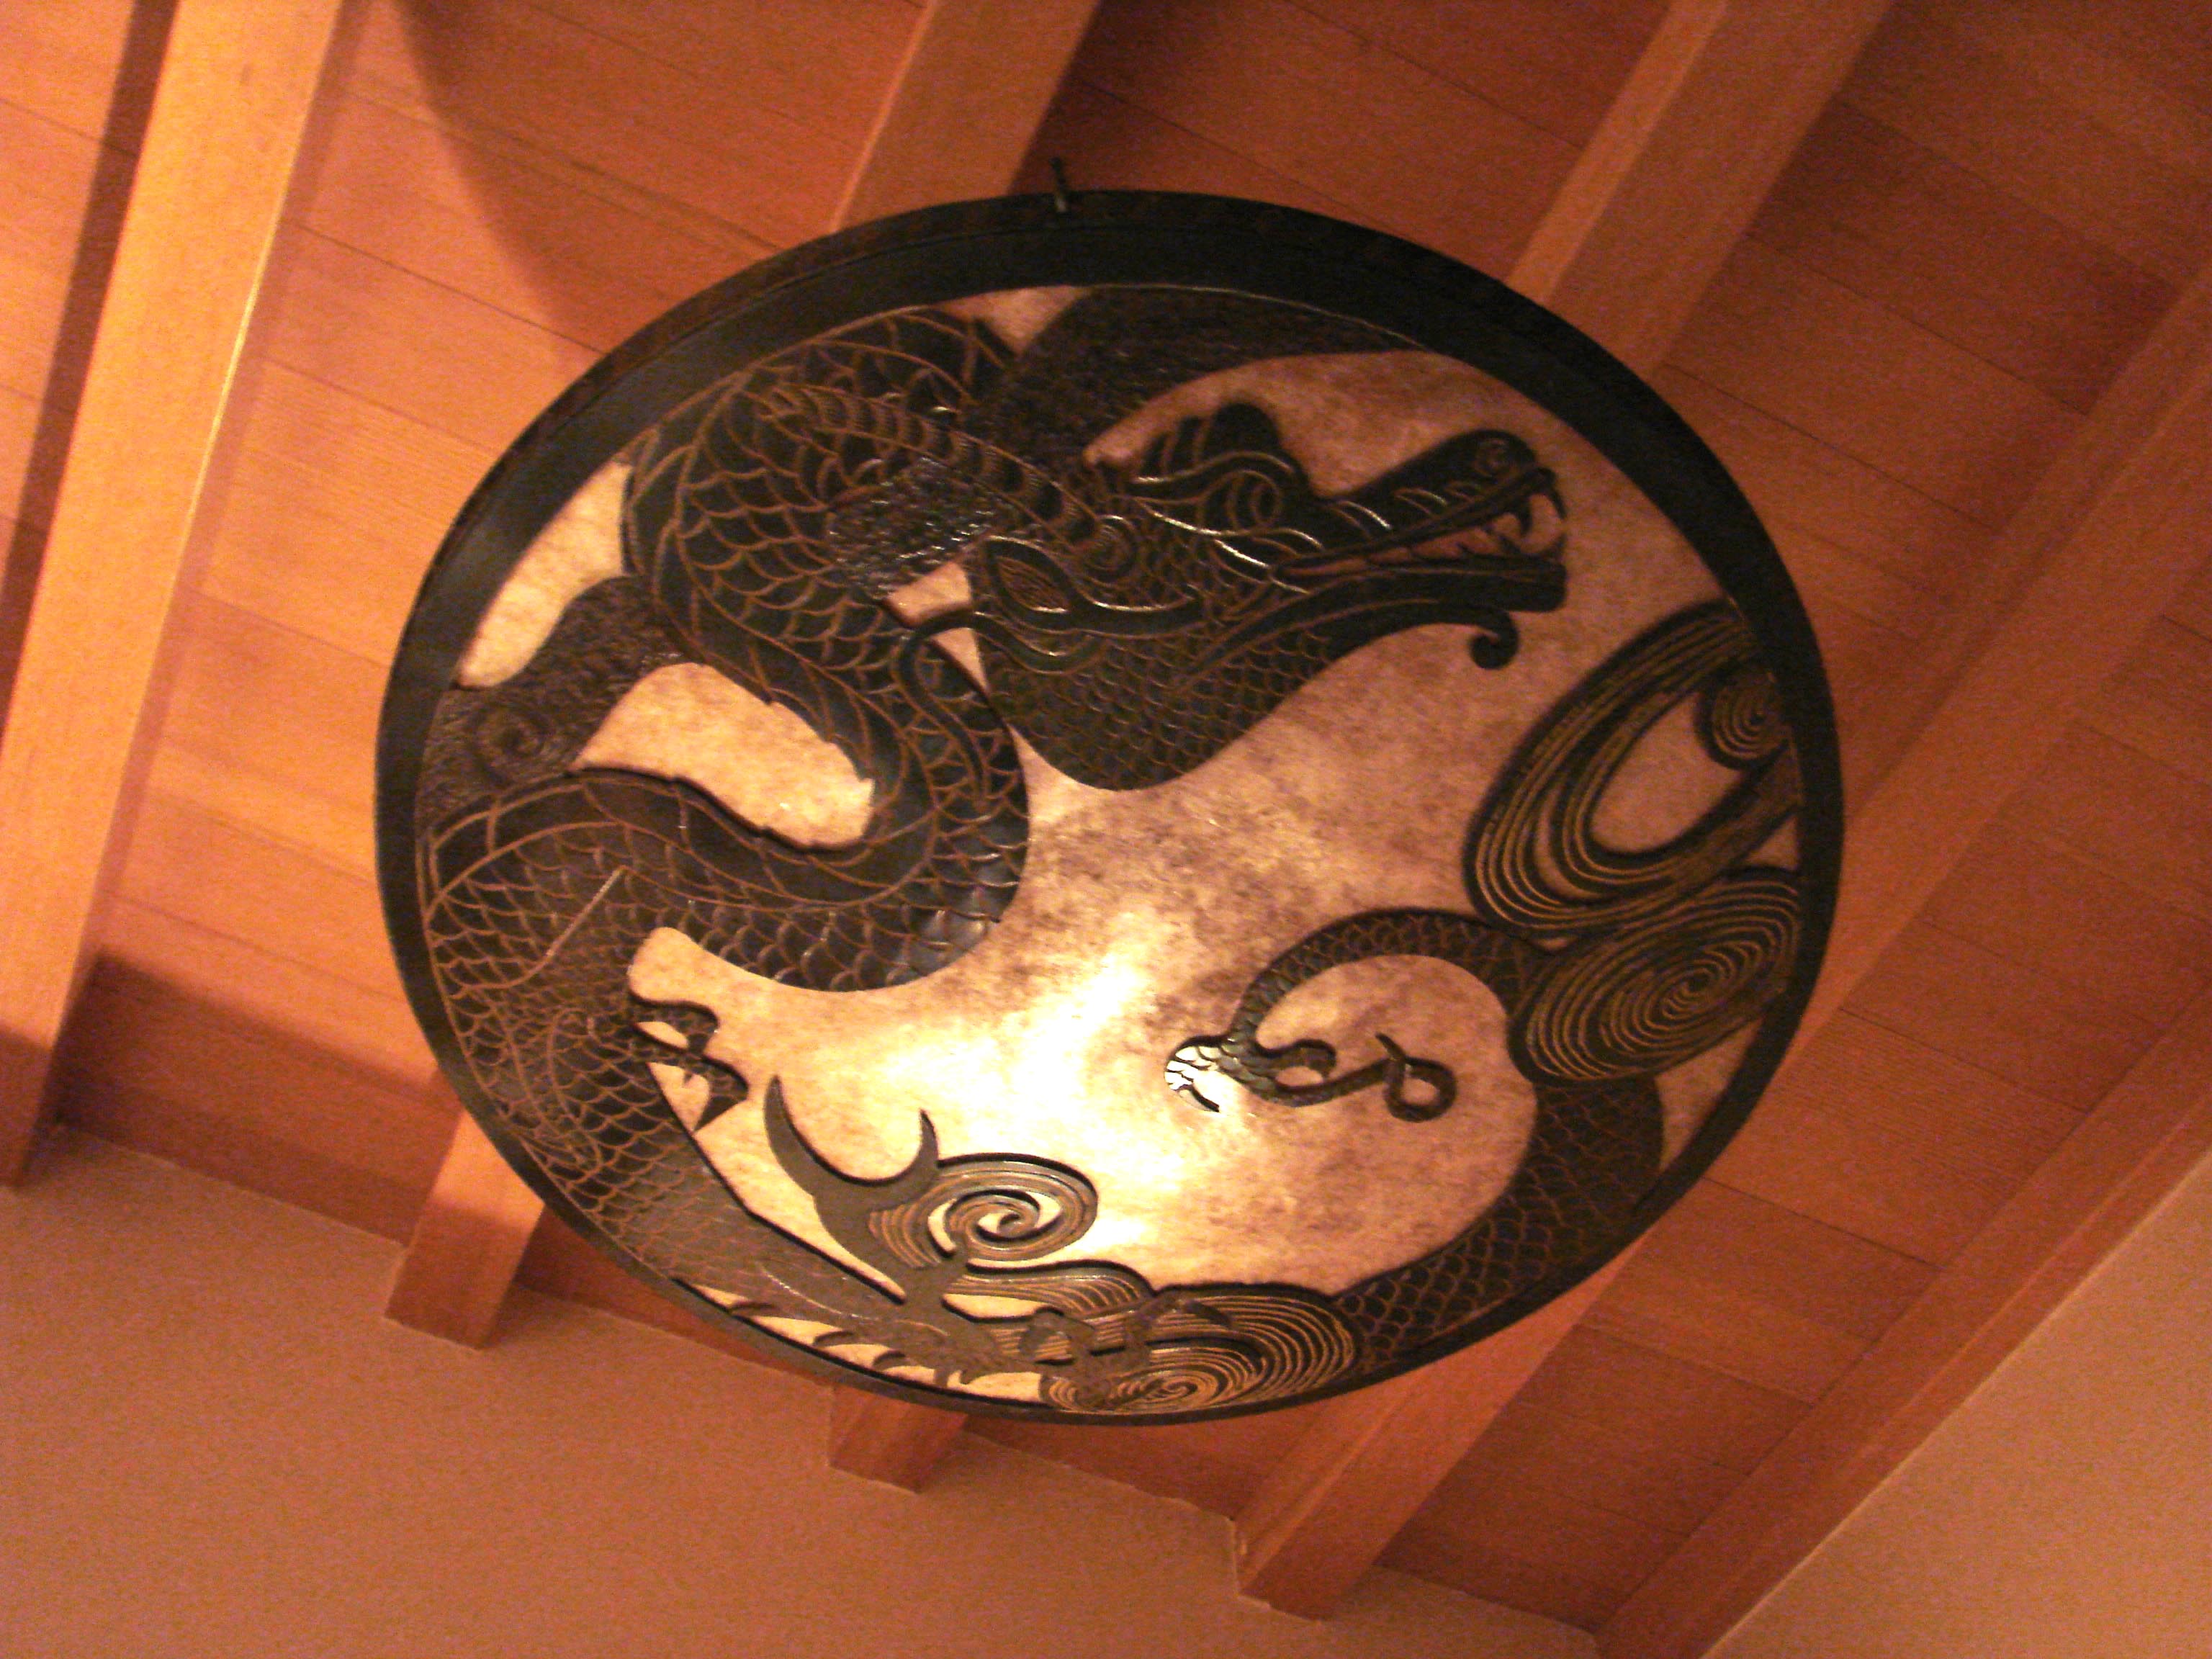 Private residence Colorado Springs 30 in diameter bowl fixture 2 of 5 Hand chiseled detail with sheet mica fill behind the dragon